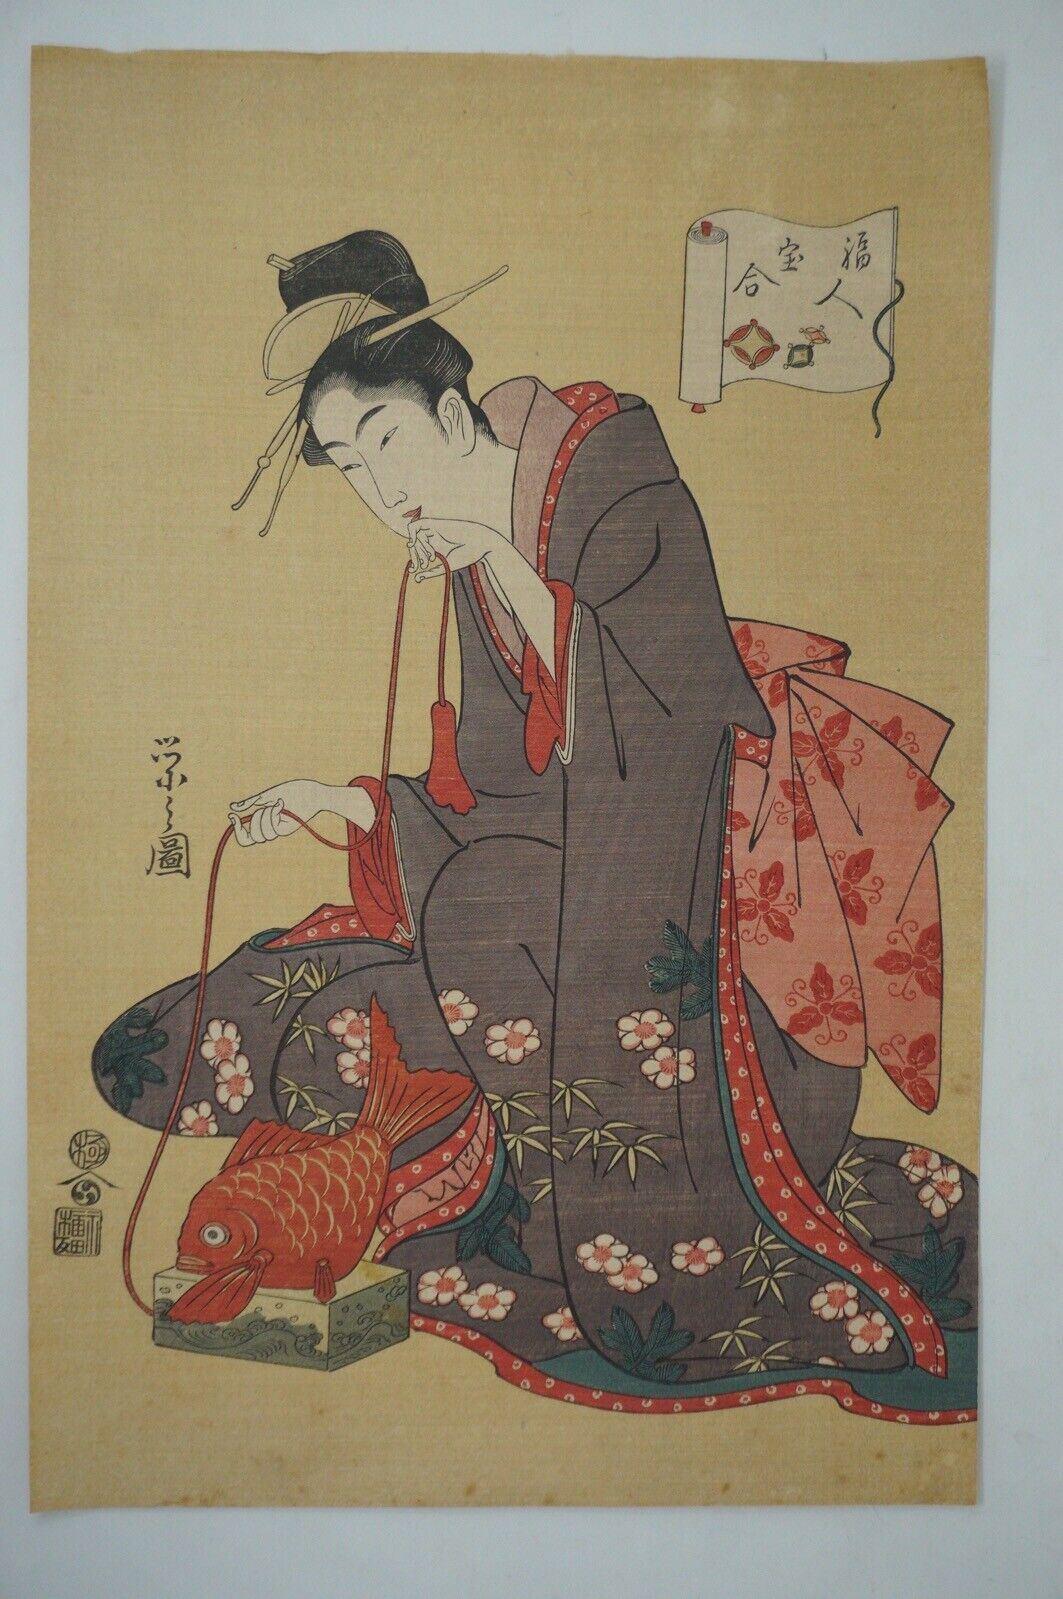 Japanese Woodblockprint by Hosoda Eishi Recarved Edition from Japan 0402E8